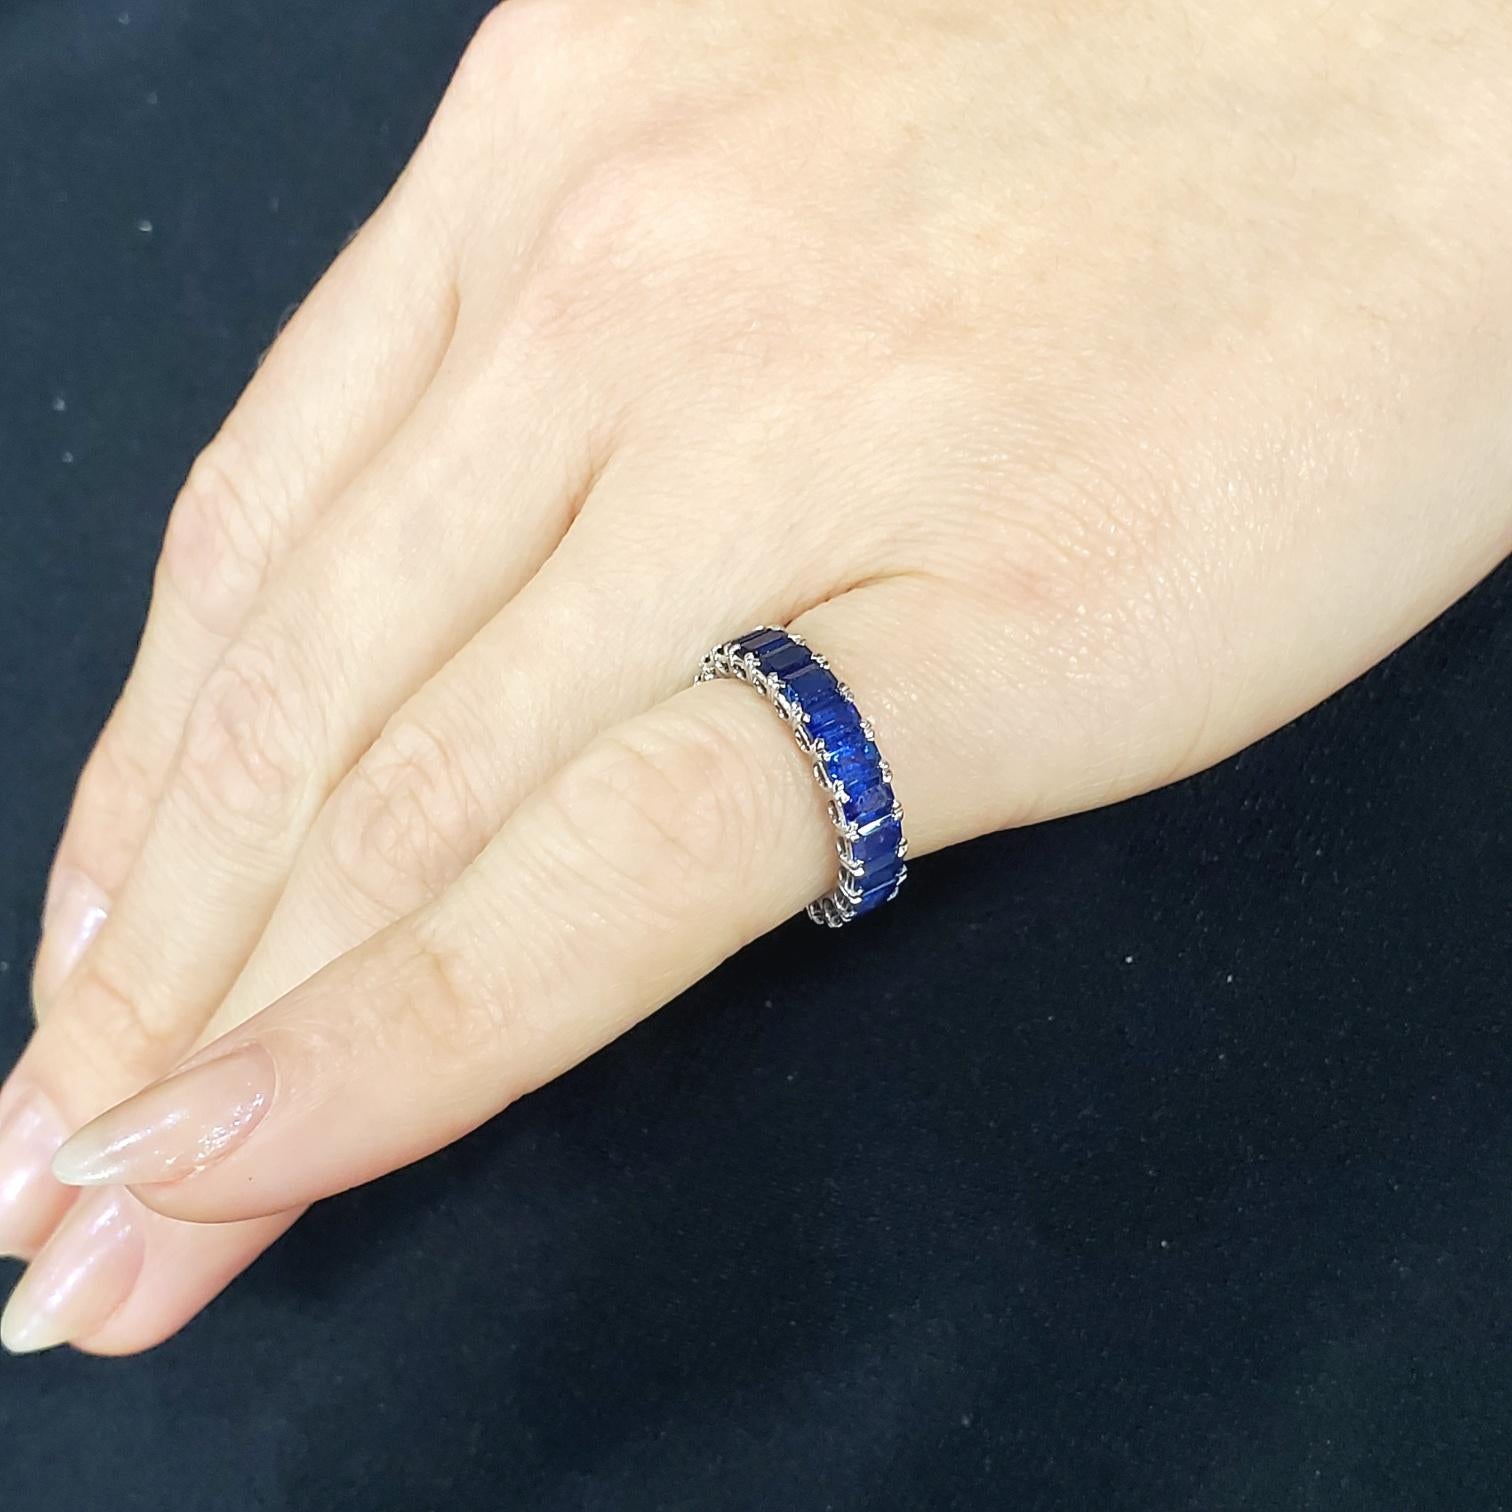 Eternity Band Ring in 18Kt White Gold with 5.58 Cts in Vivid Blue Sapphires In Excellent Condition For Sale In Miami, FL